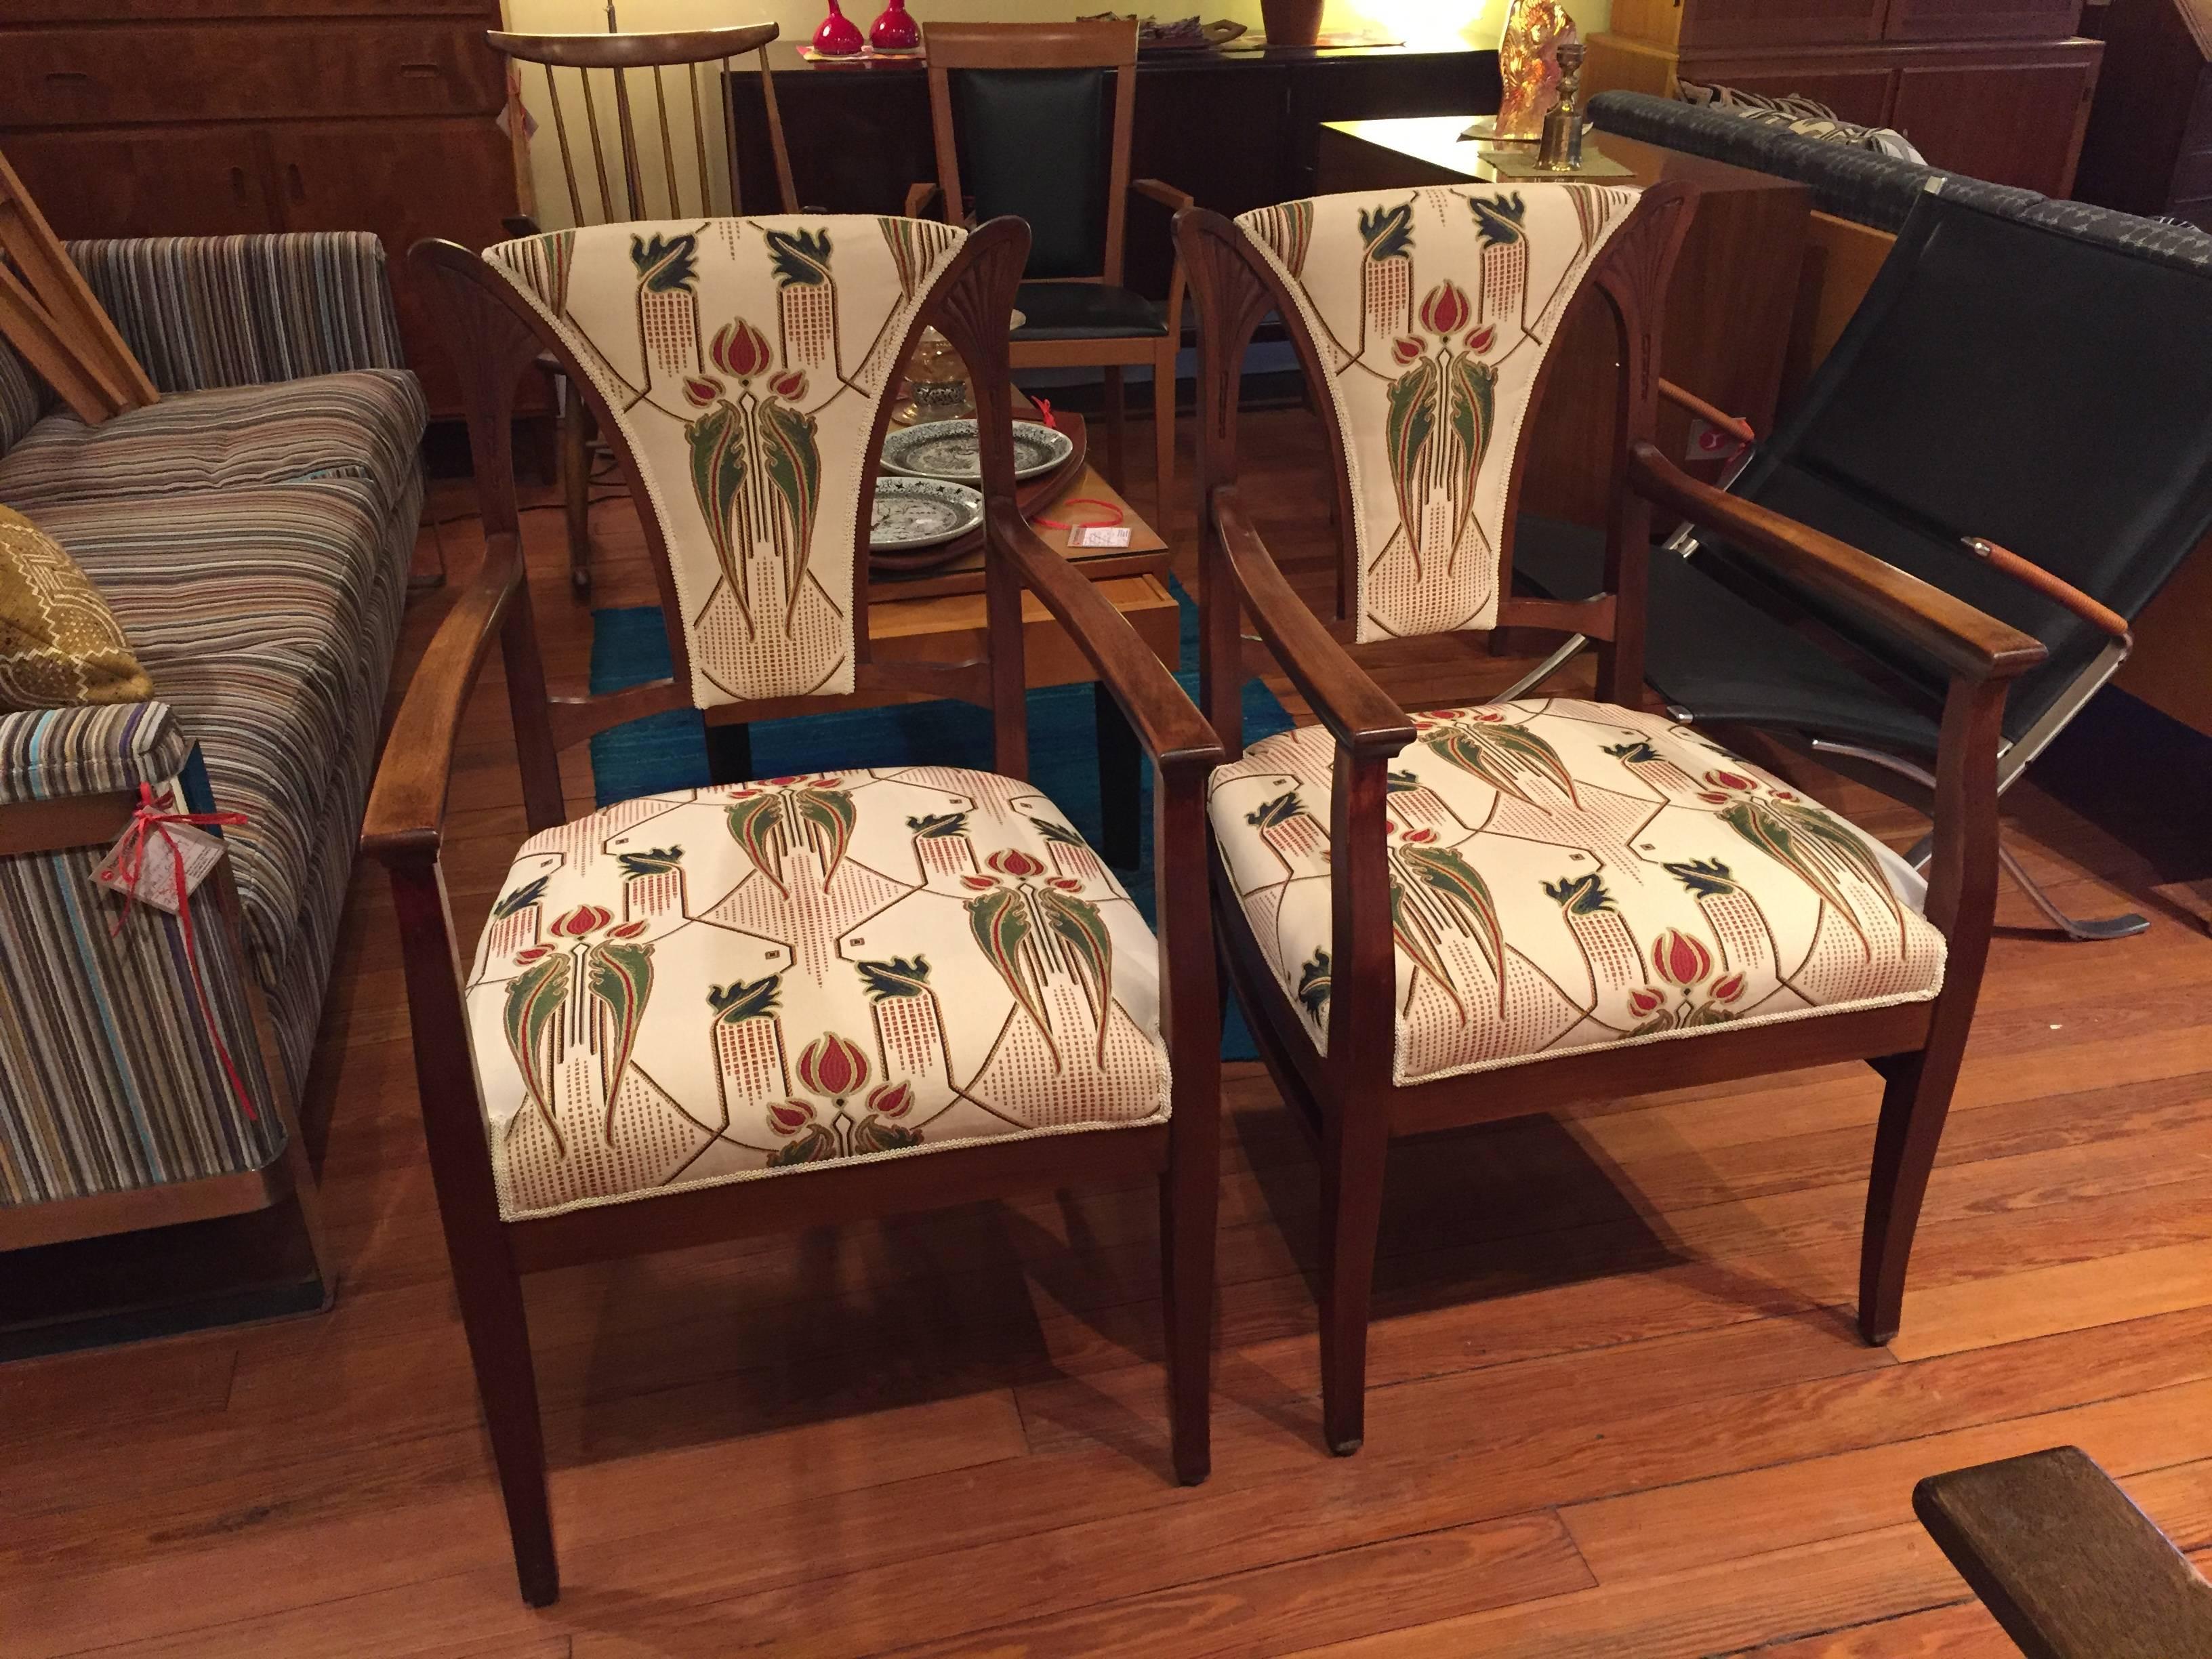 Pair of mahogany armchairs with Art Nouveau carving. New John Lewis upholstery.